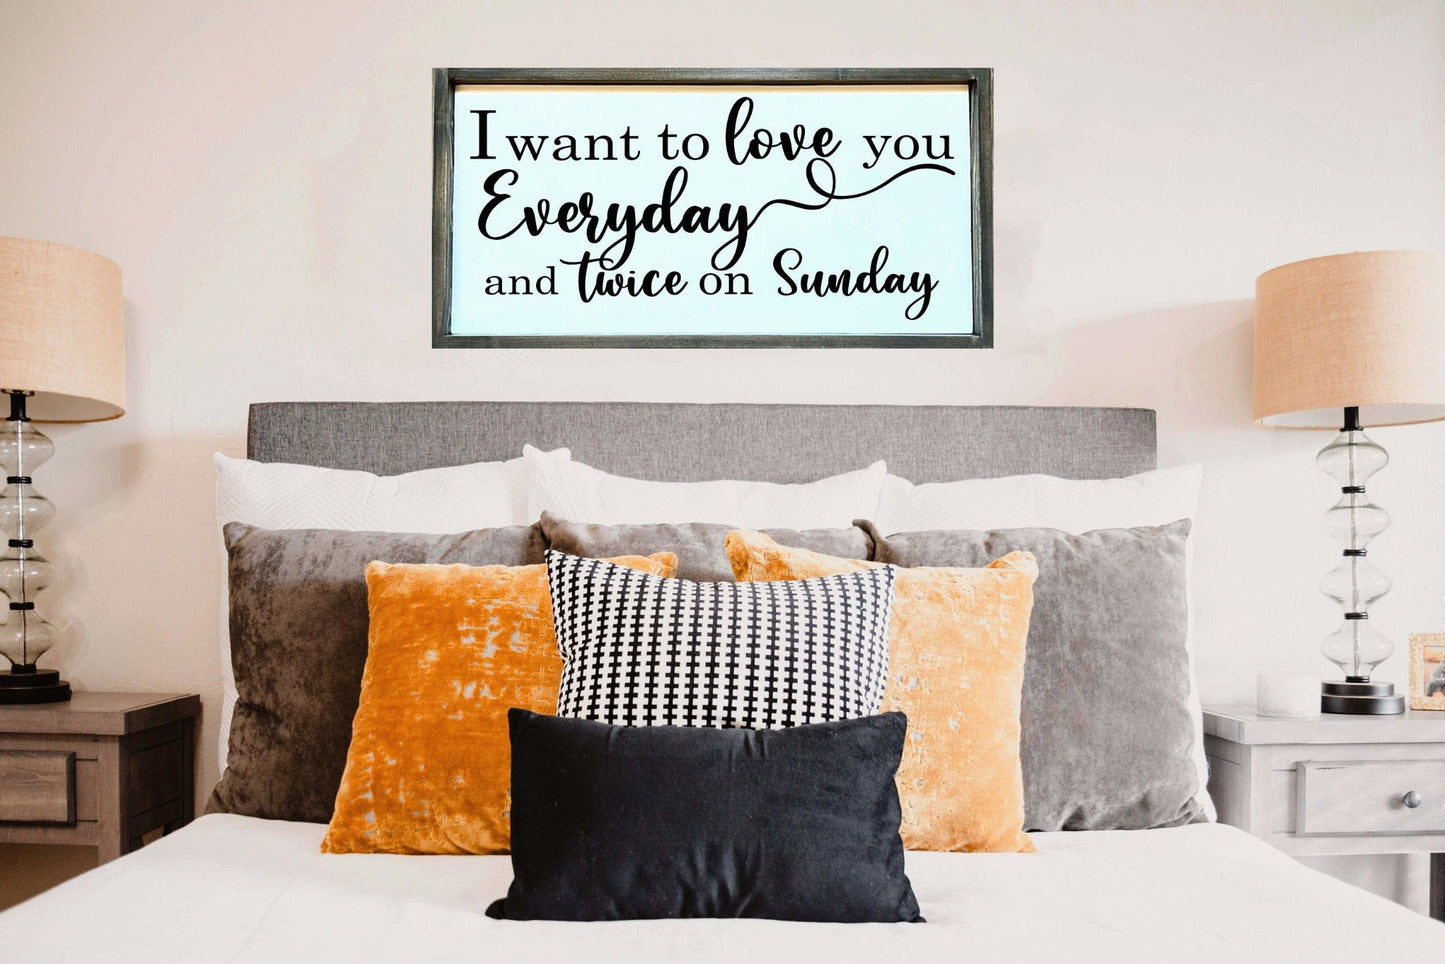 I want to love you everyday and twice on Sunday bedroom sign.